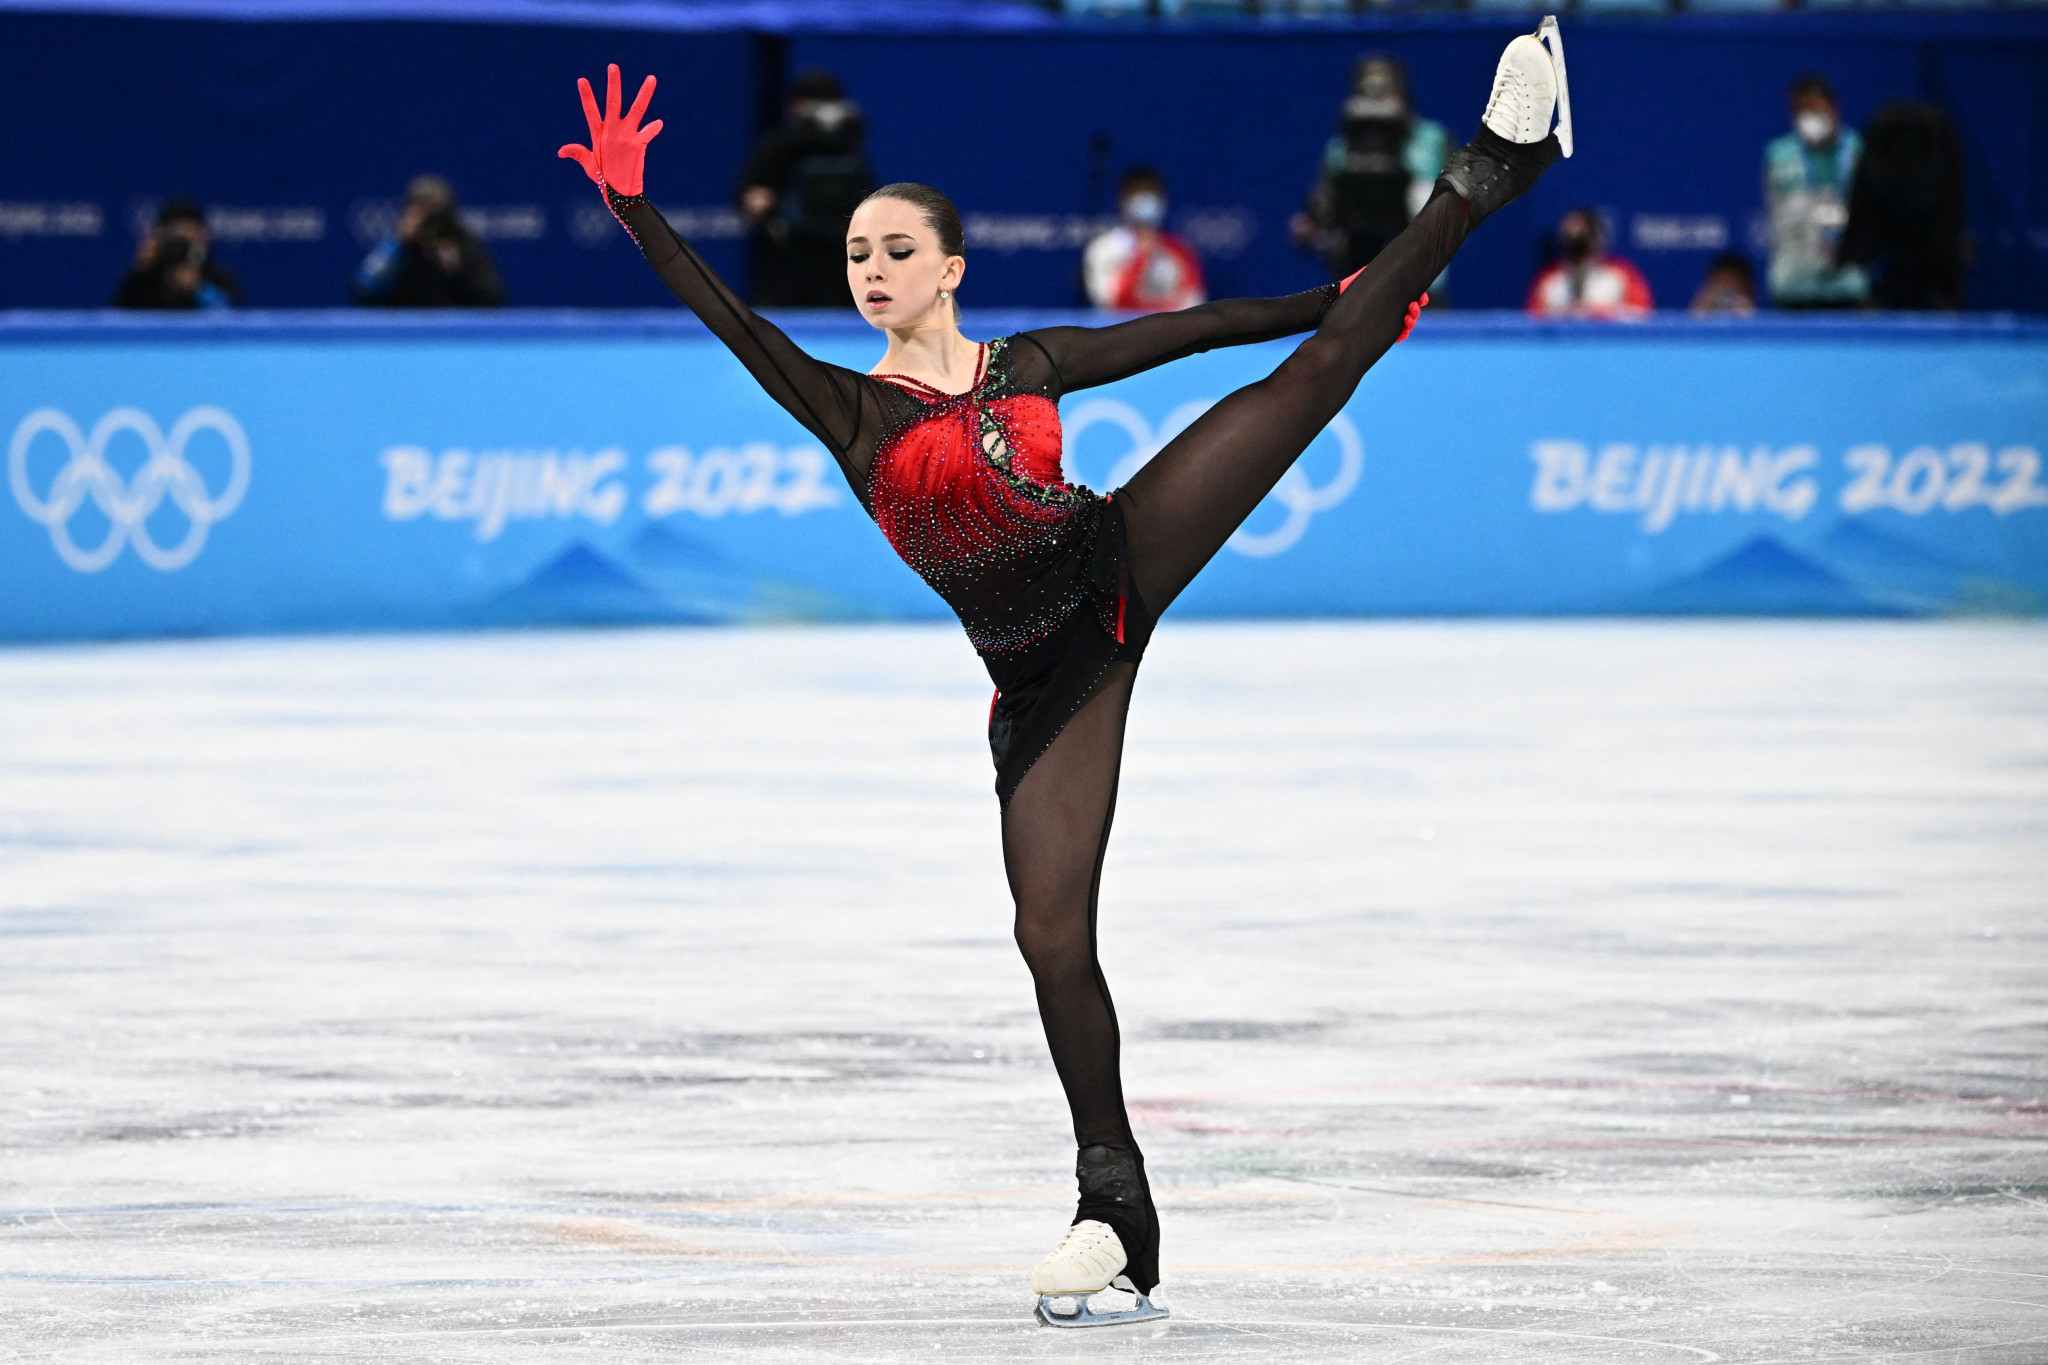 Kamila Valieva's Beijing 2022 Olympics will be remembered as one of the controversial moments at the Games in history ©Getty Images